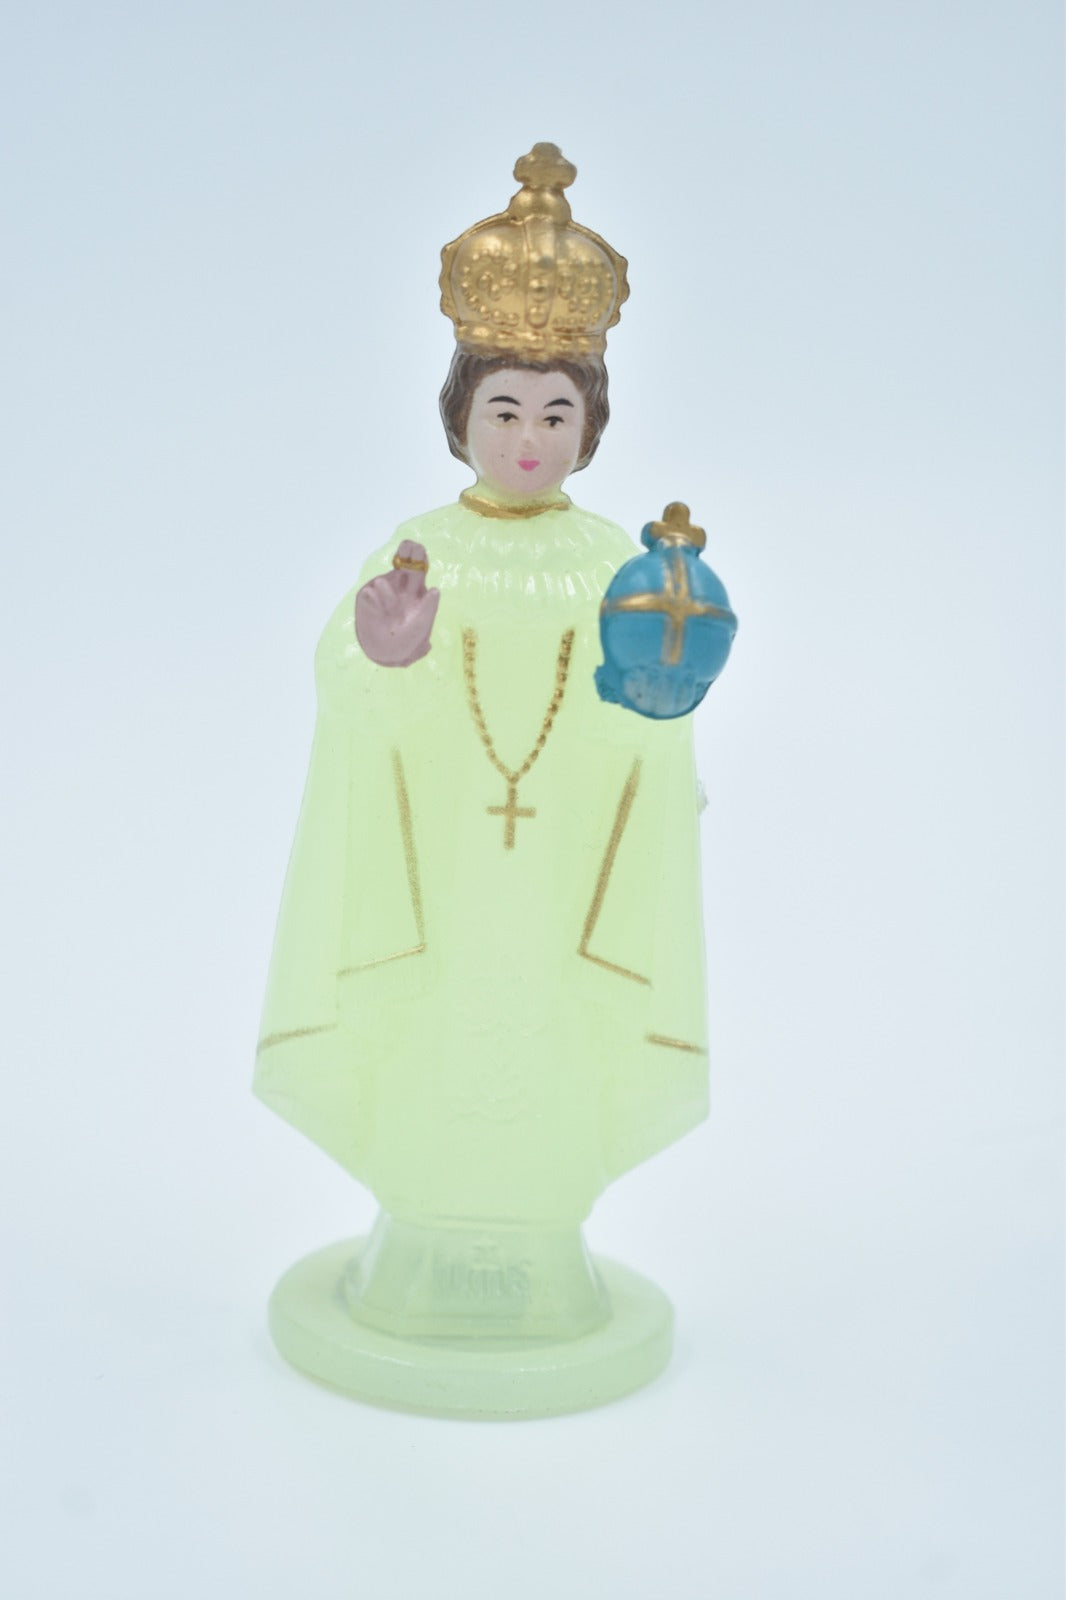 Infant Jesus 3 Inch Car Statue - Handcrafted to Bless and Protect